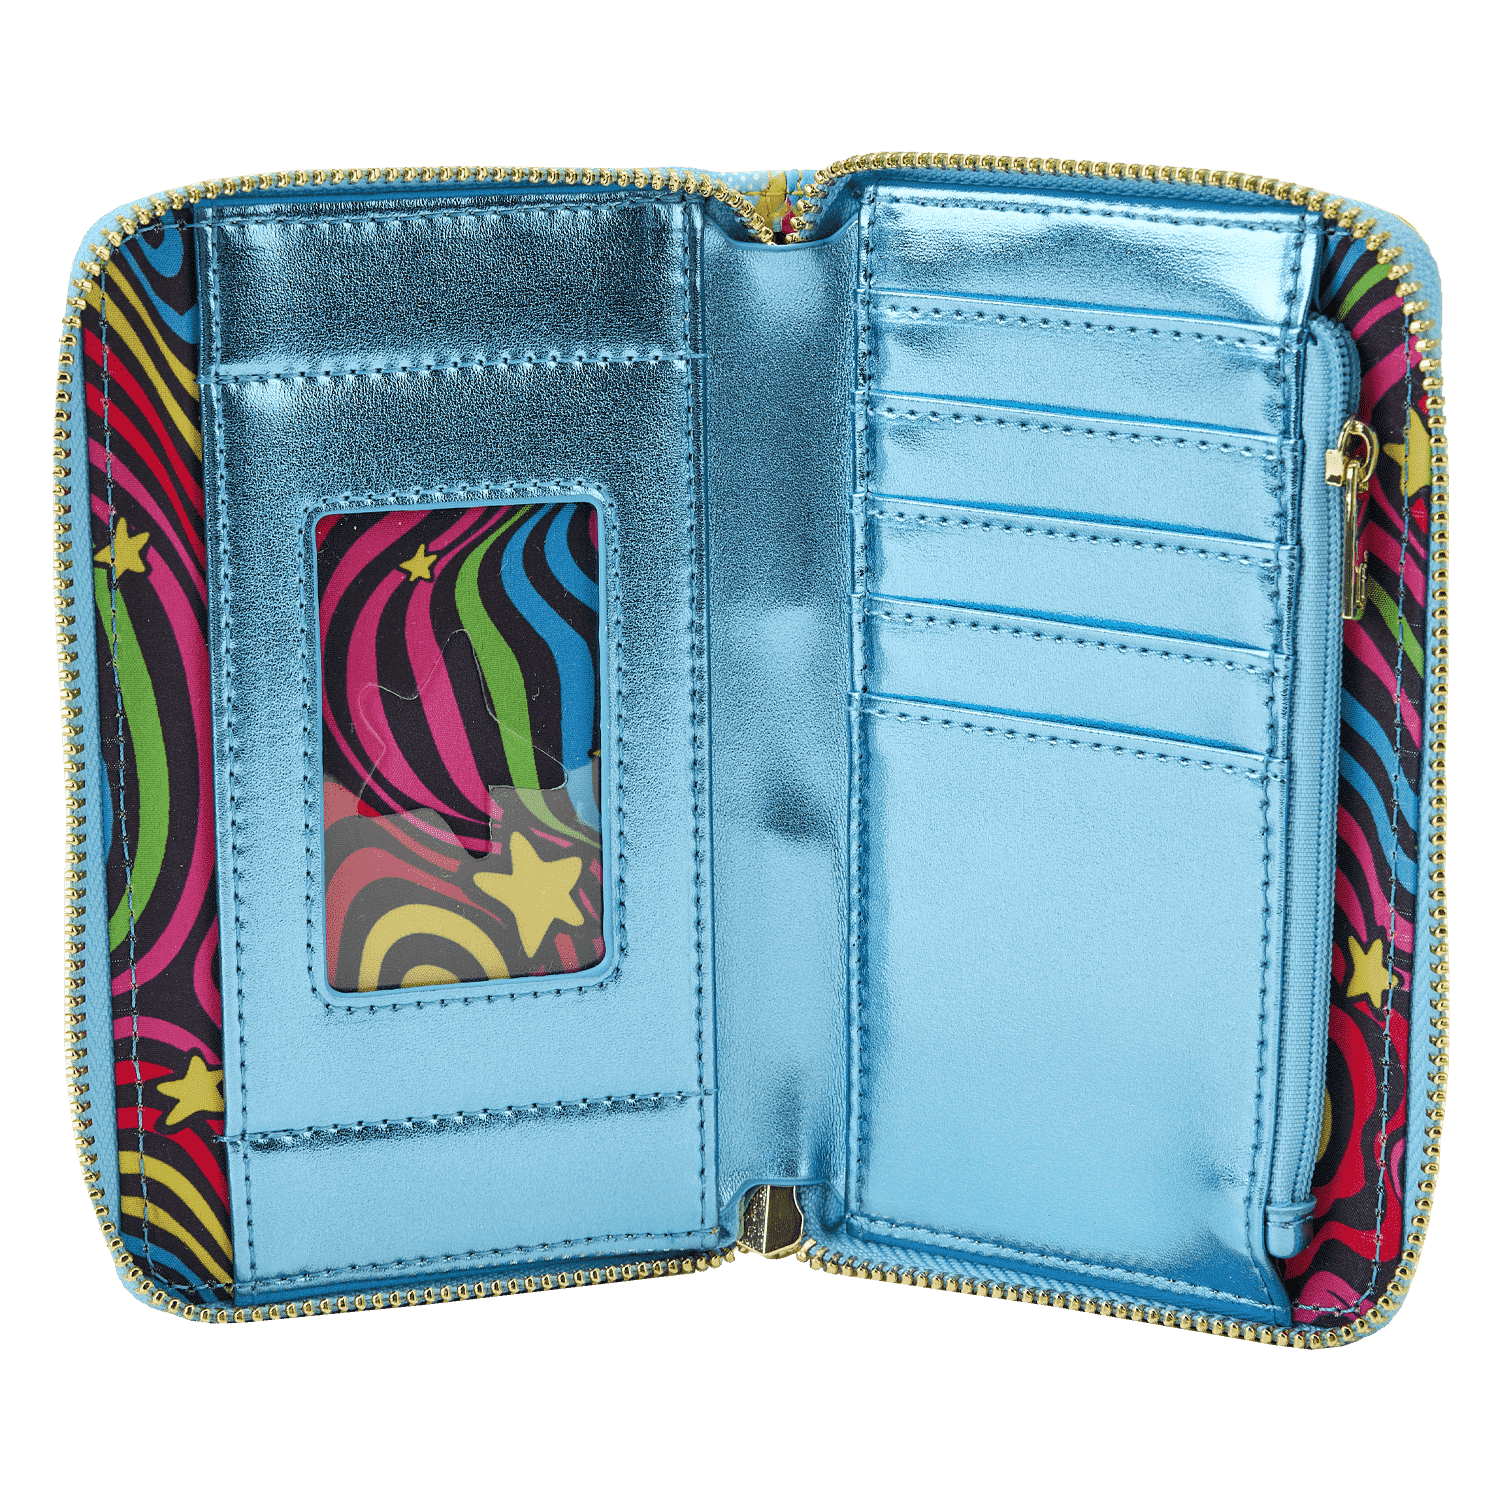 Buy The Beatles Magical Mystery Tour Bus Zip Around Wallet at Loungefly.